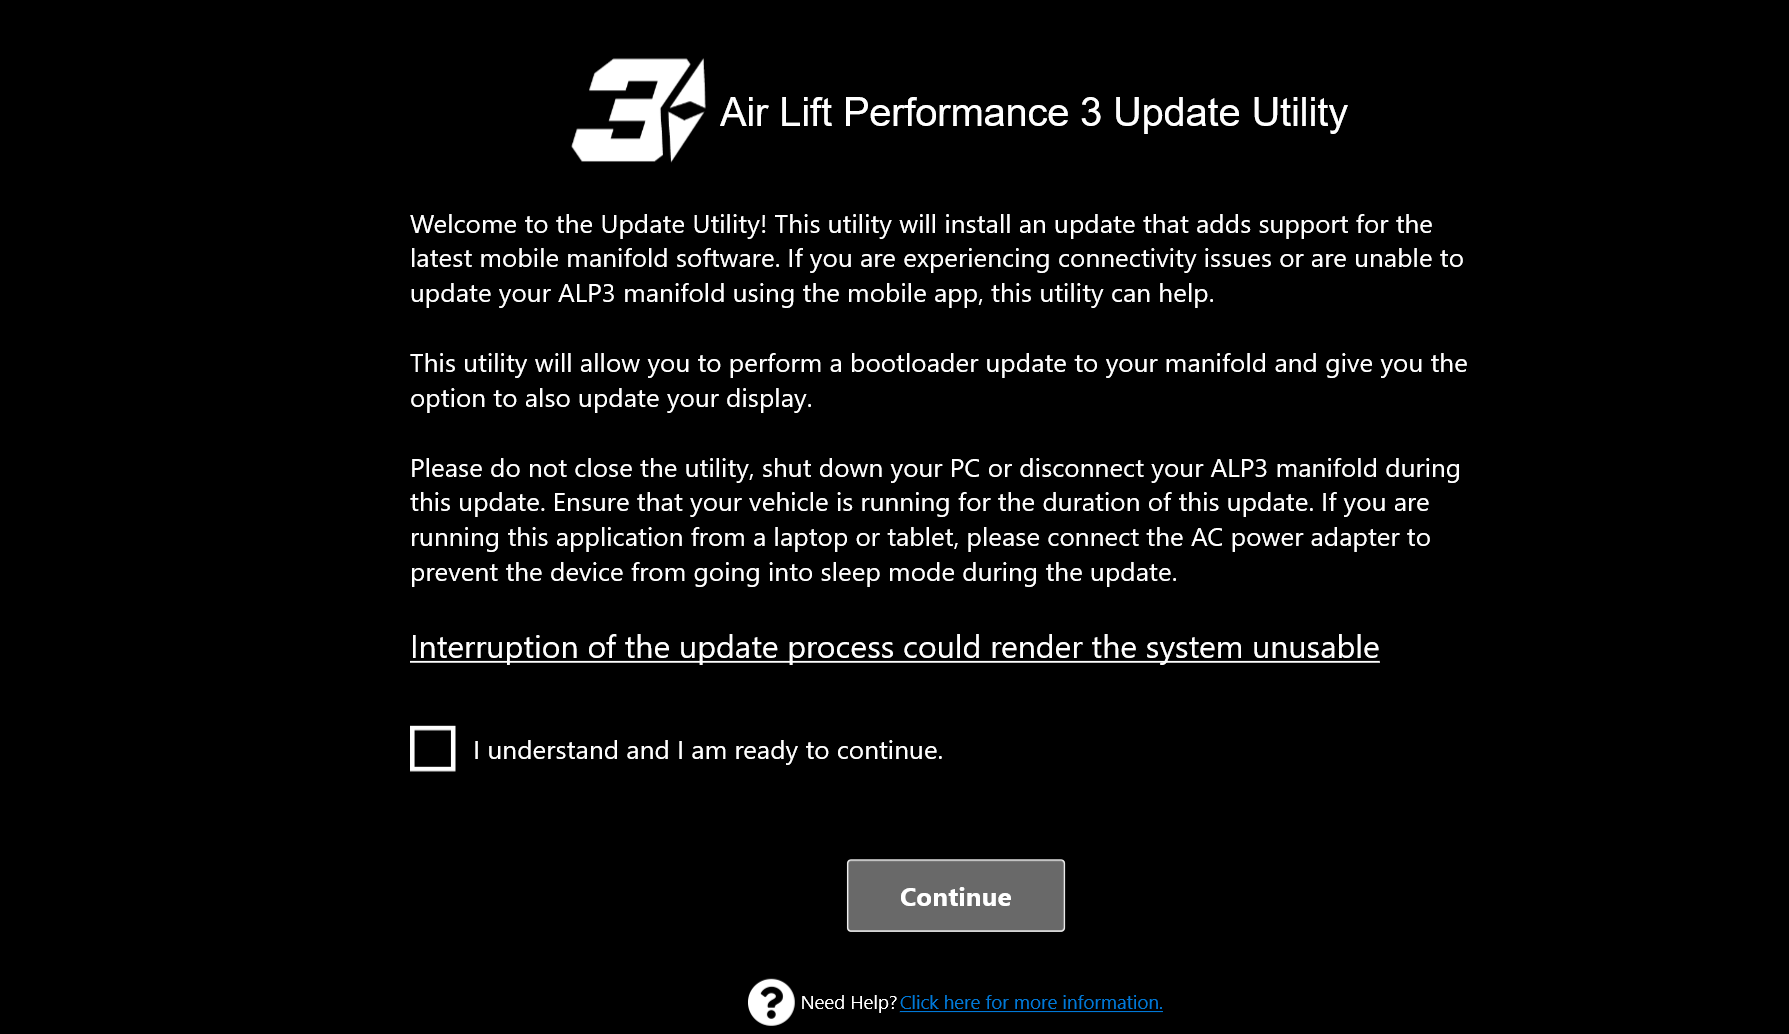 Air Lift Performance 3 Update Utility